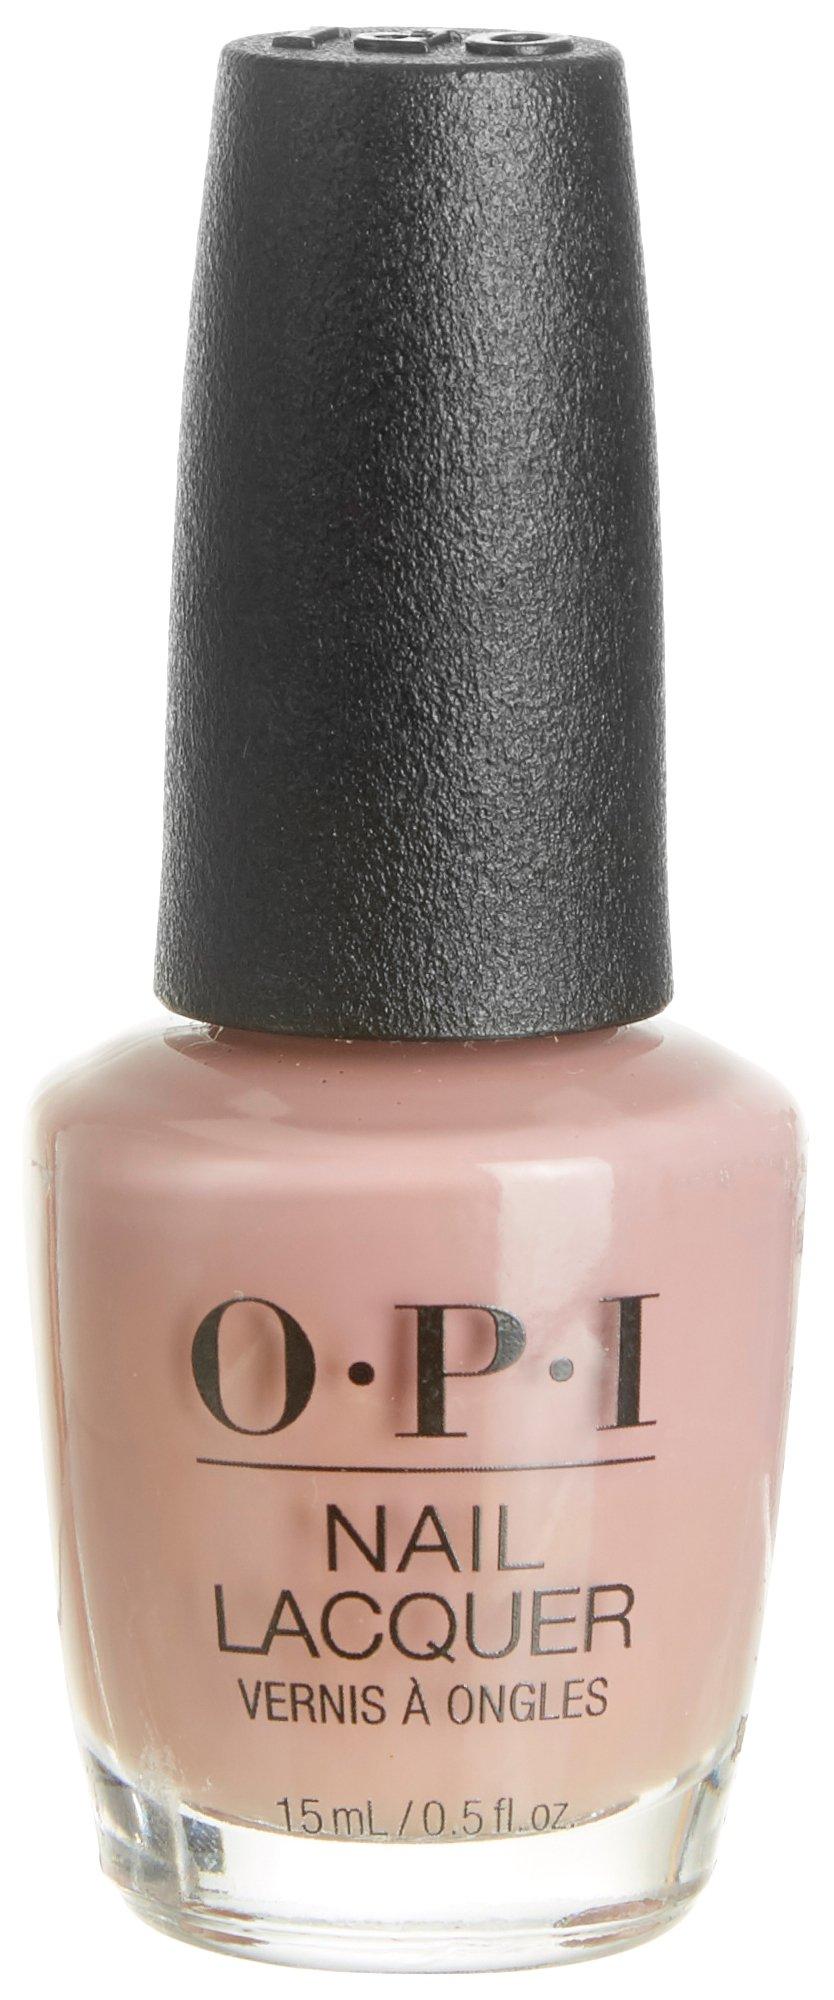 OPI Tickle My Francey-y Rose Nail Polish